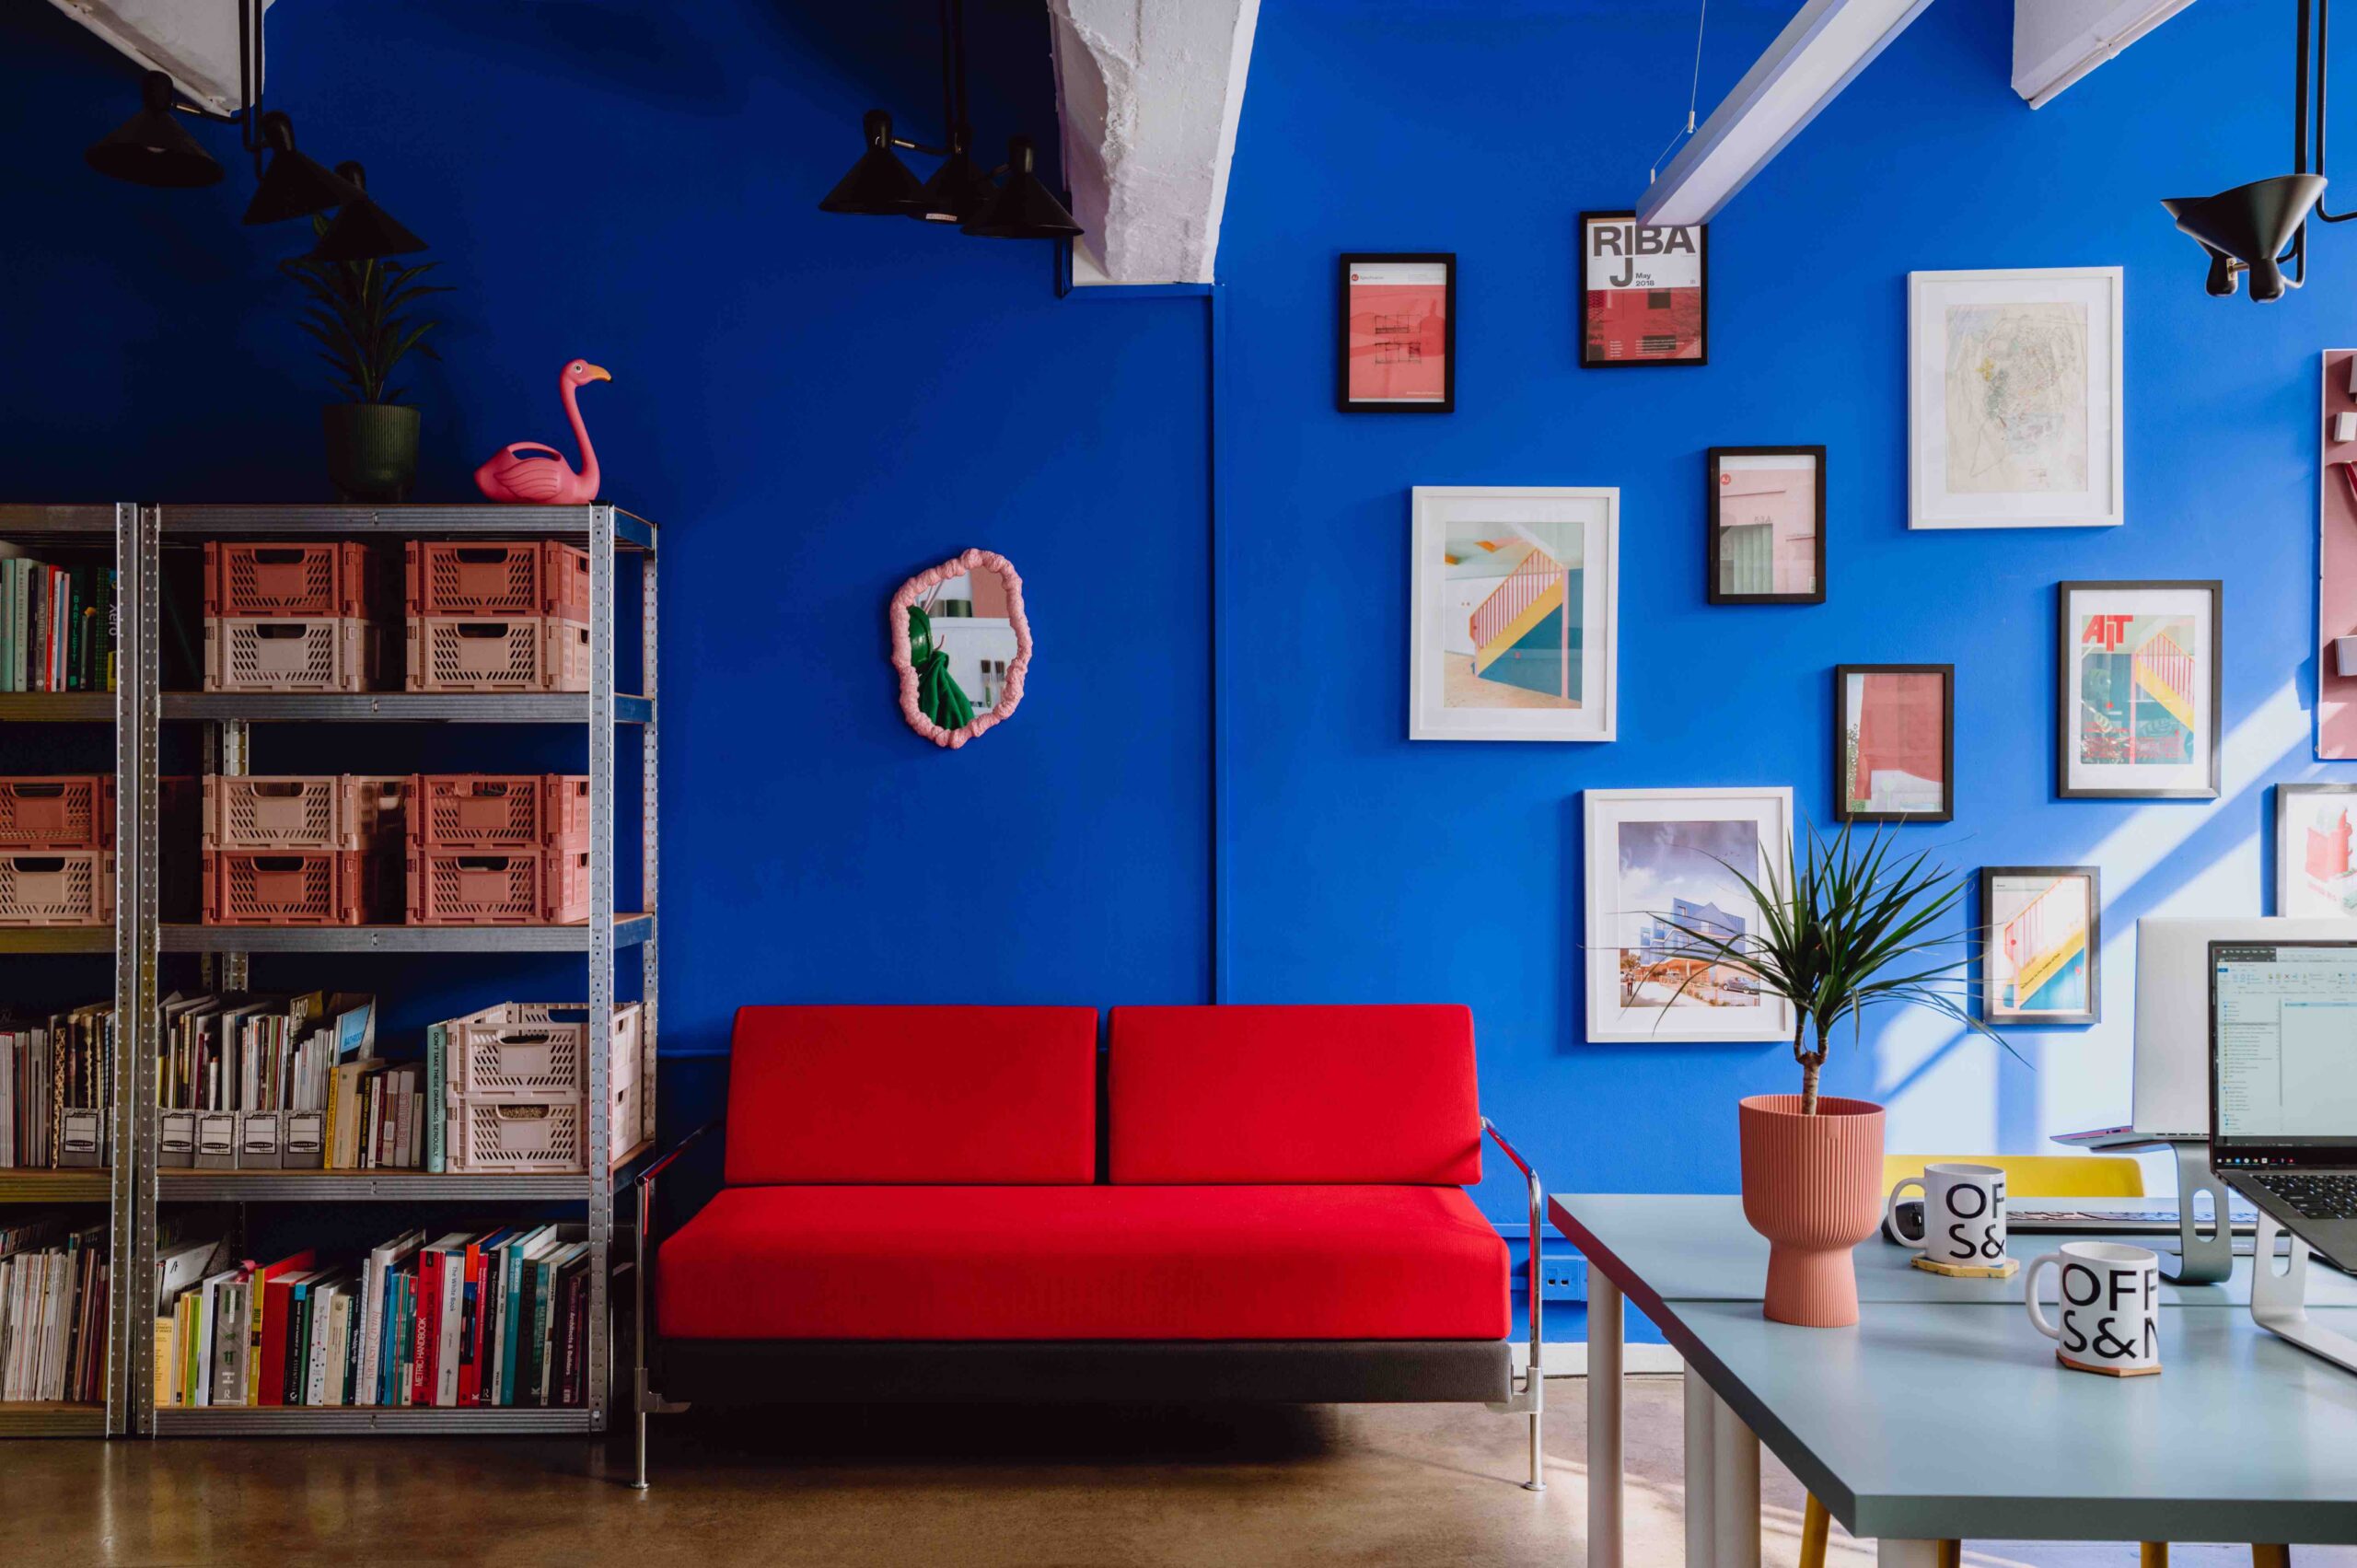 Office S&M 'do more with less' in their east London office incorporating colour, innovative materials and lush plants